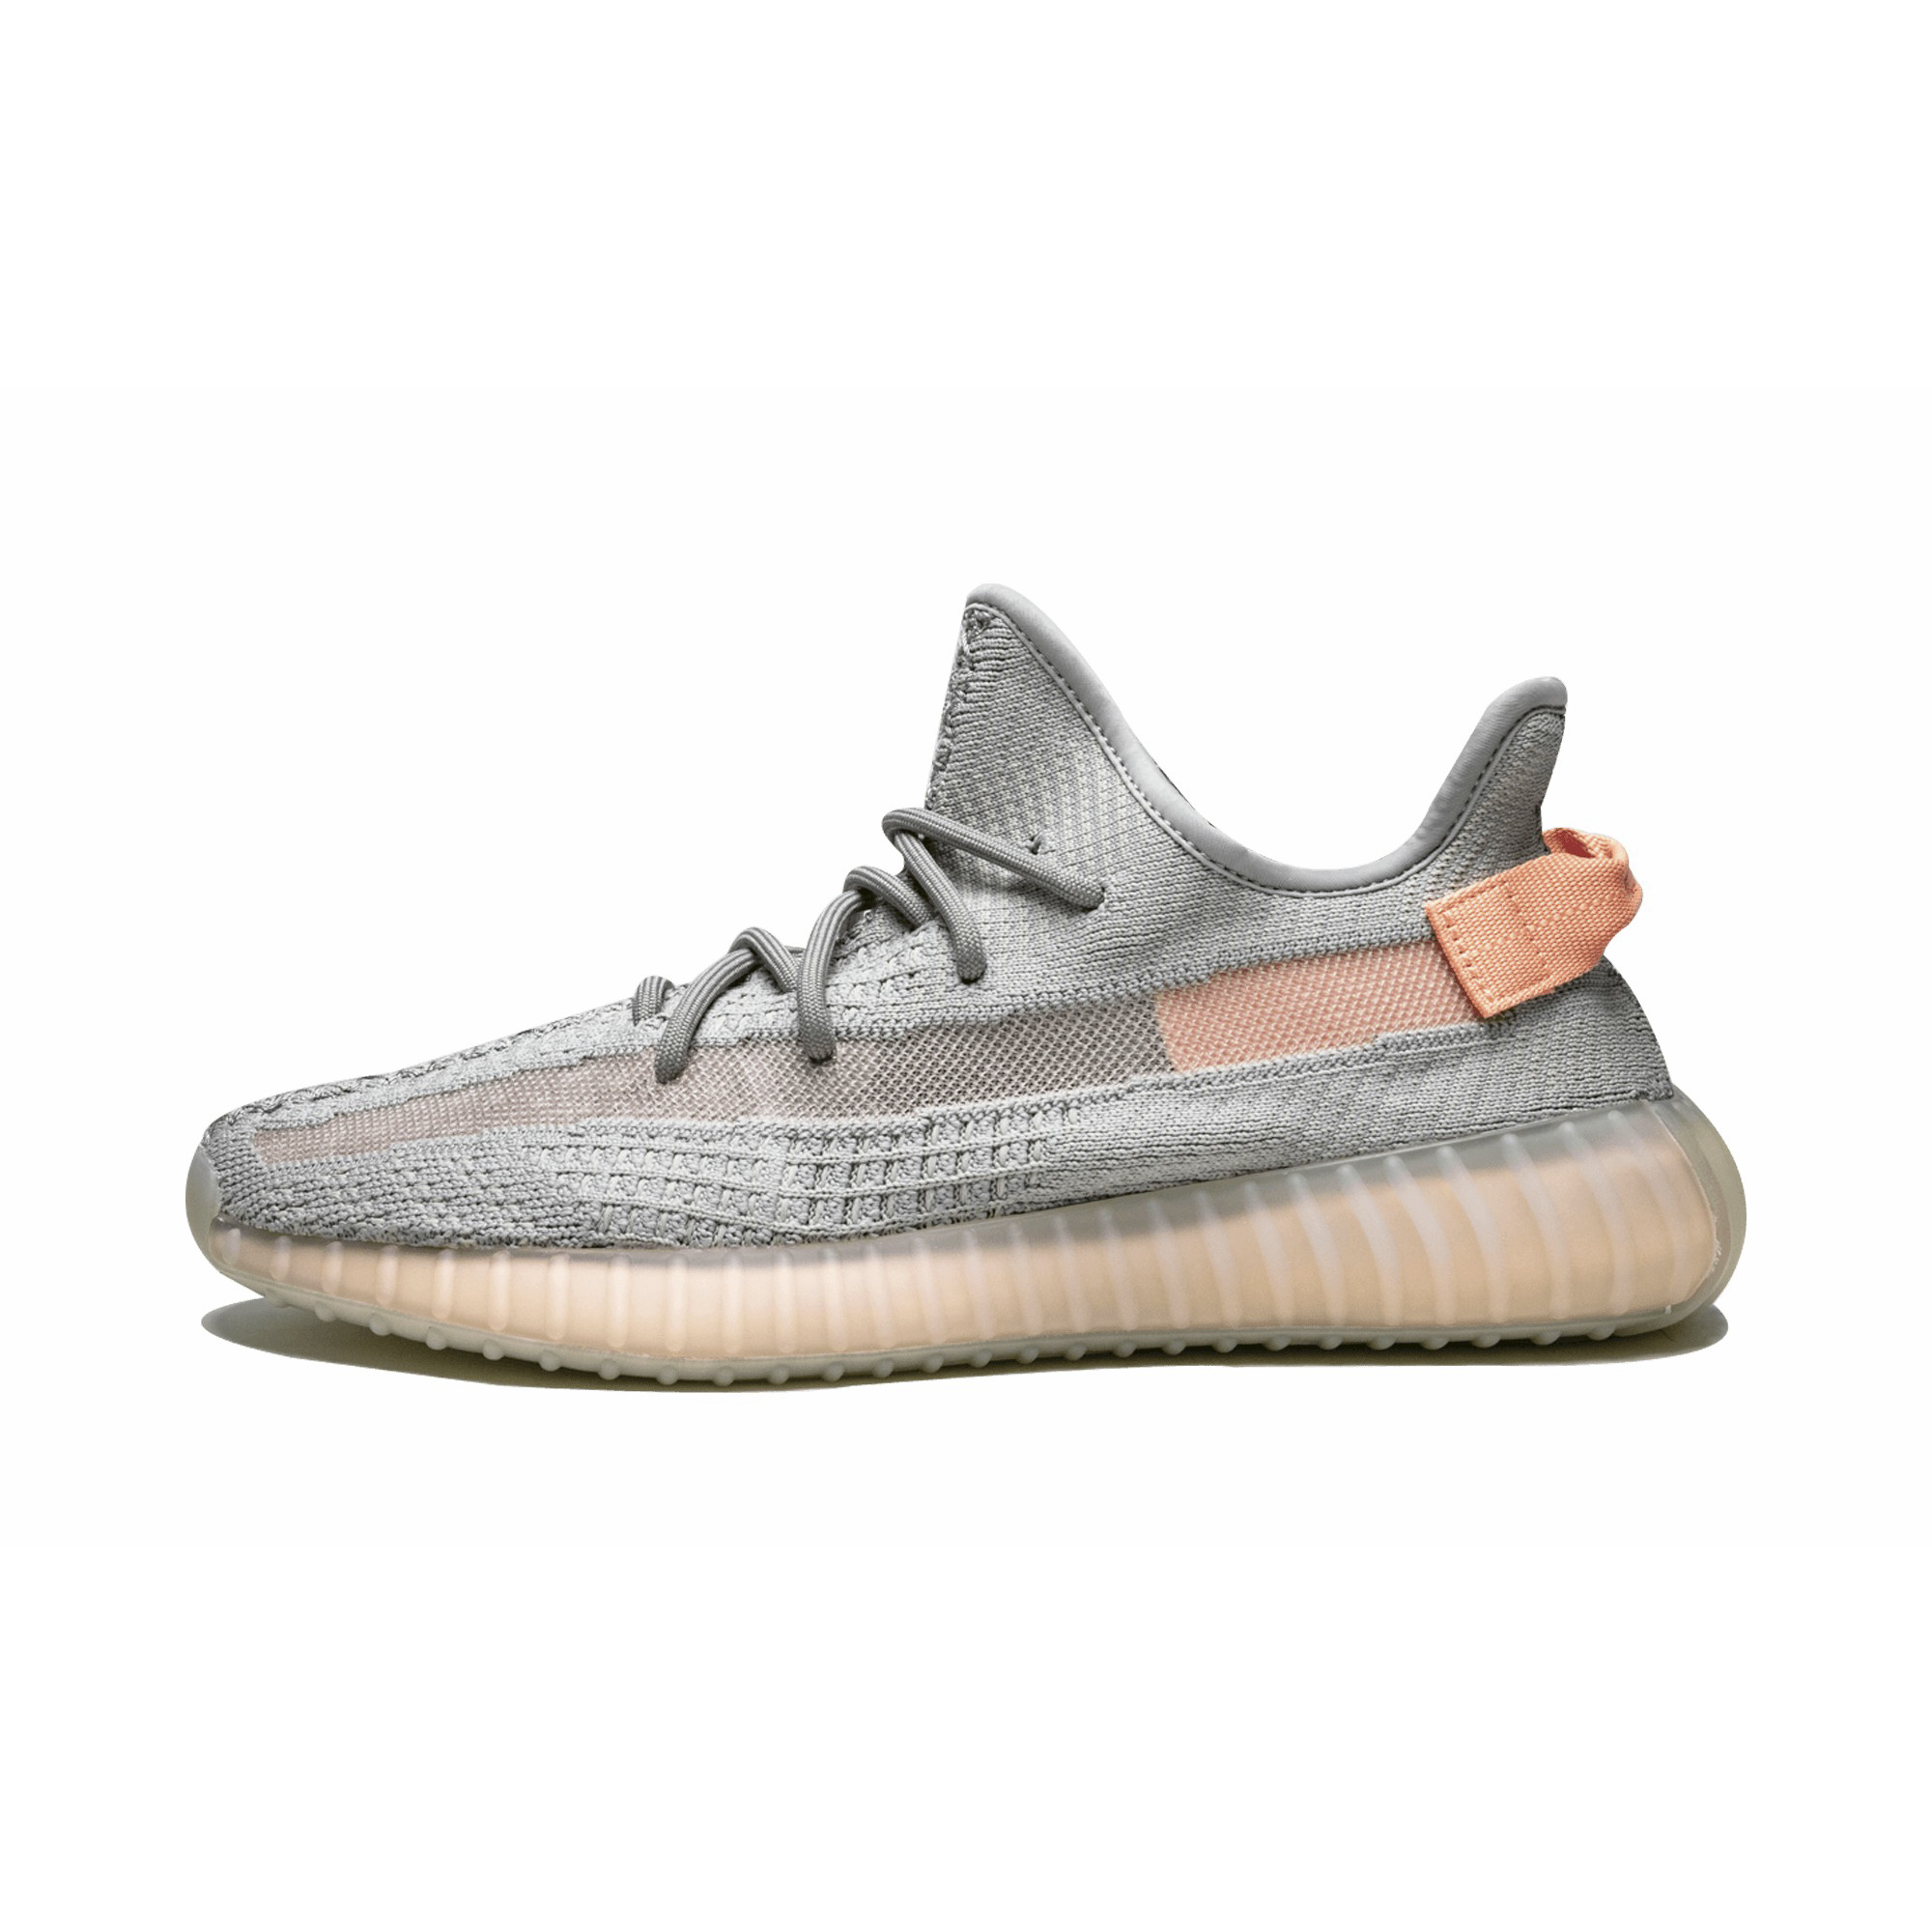 Accidental container secondary Yeezy 350 Boost V2 True Form – PK-Shoes